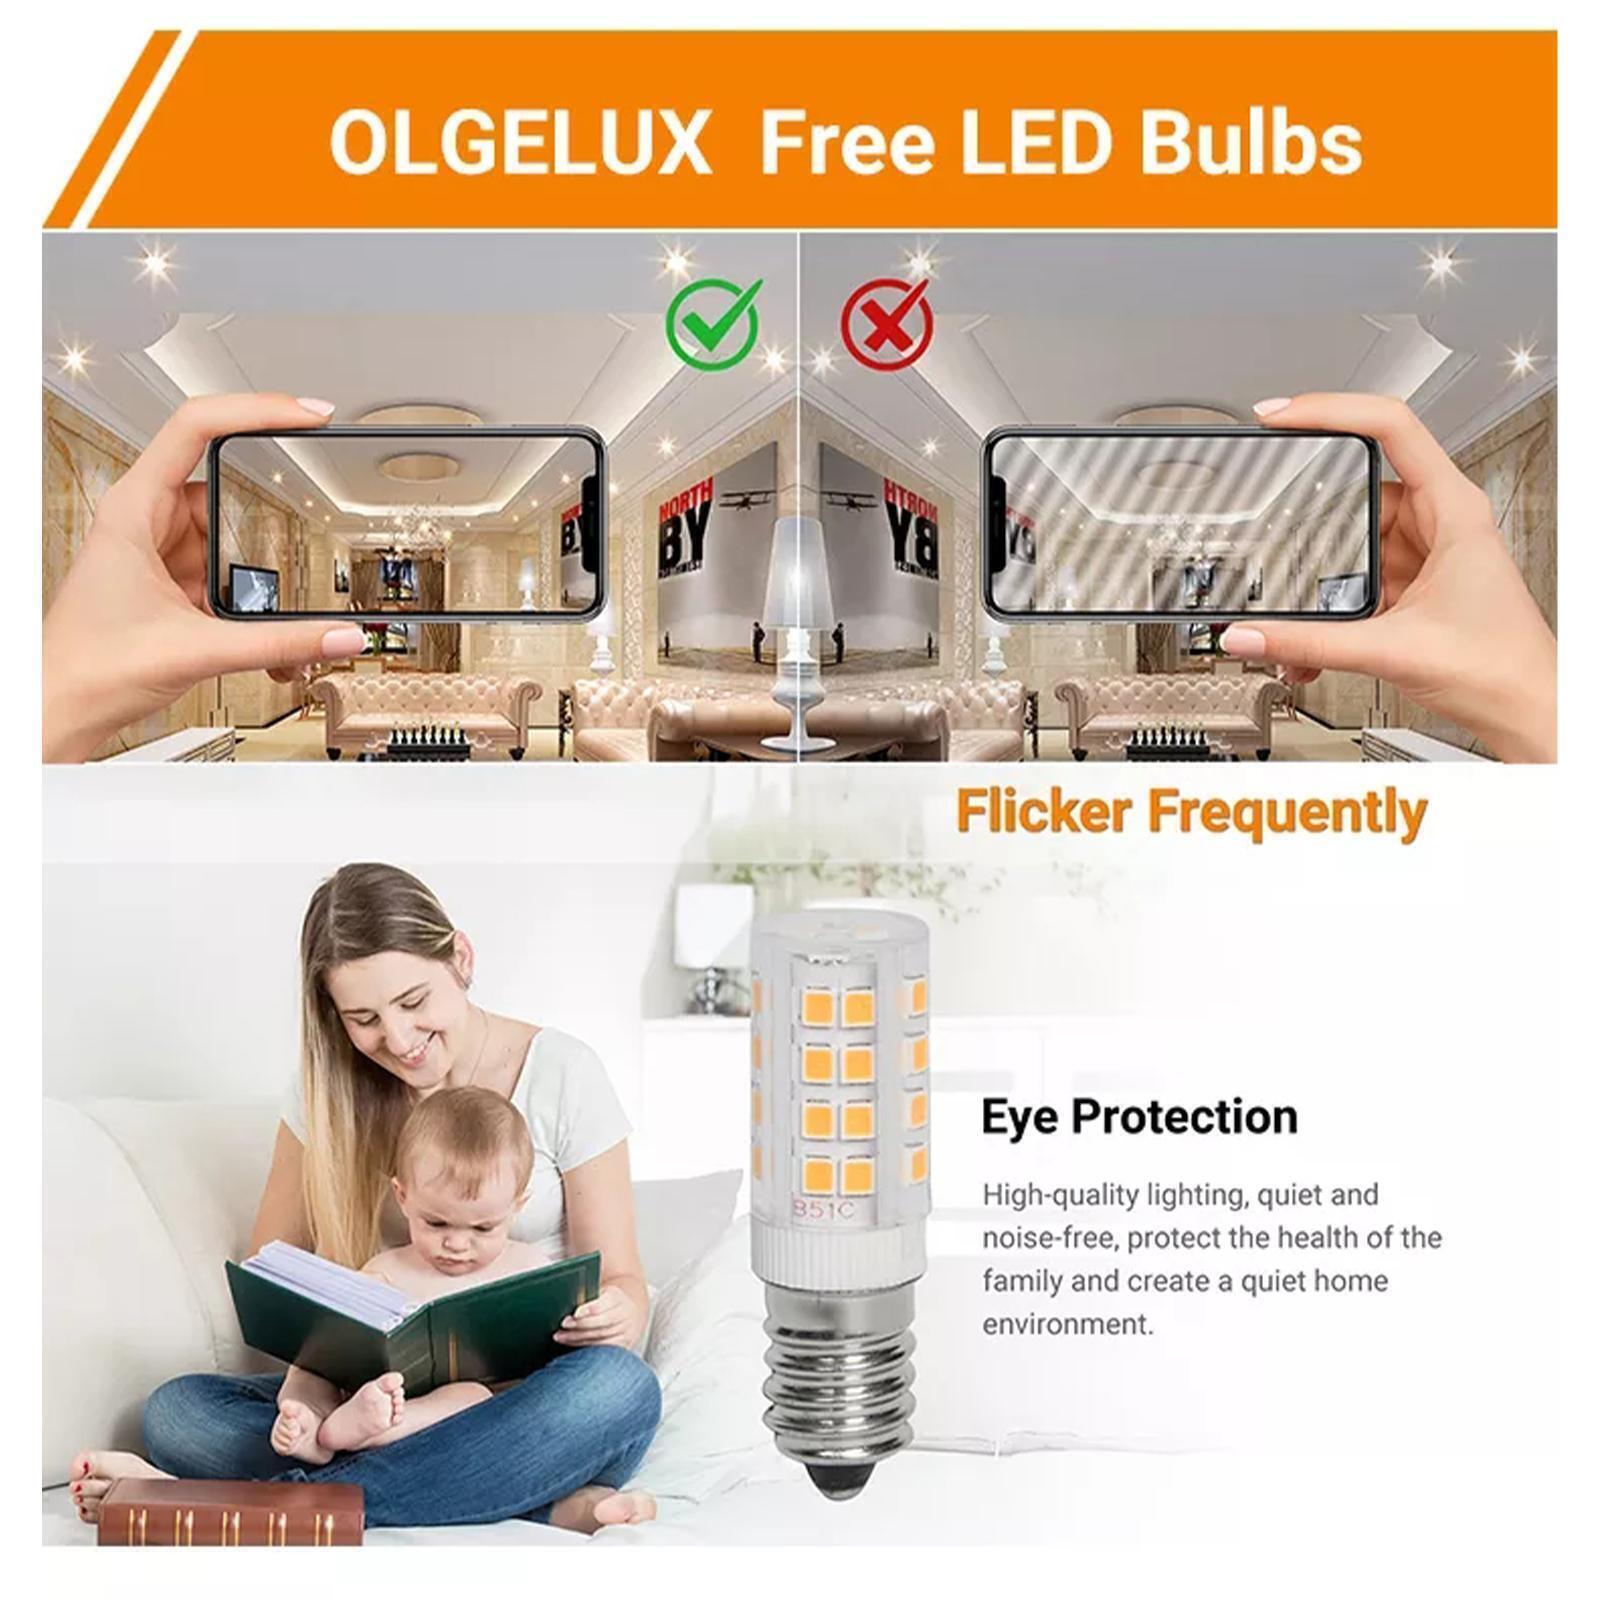 15 Pack LED Corn Bulb E14 2835 SMD Globe Lamp 5W Night Lights For Himalayan Salt Lamps - Office Catch